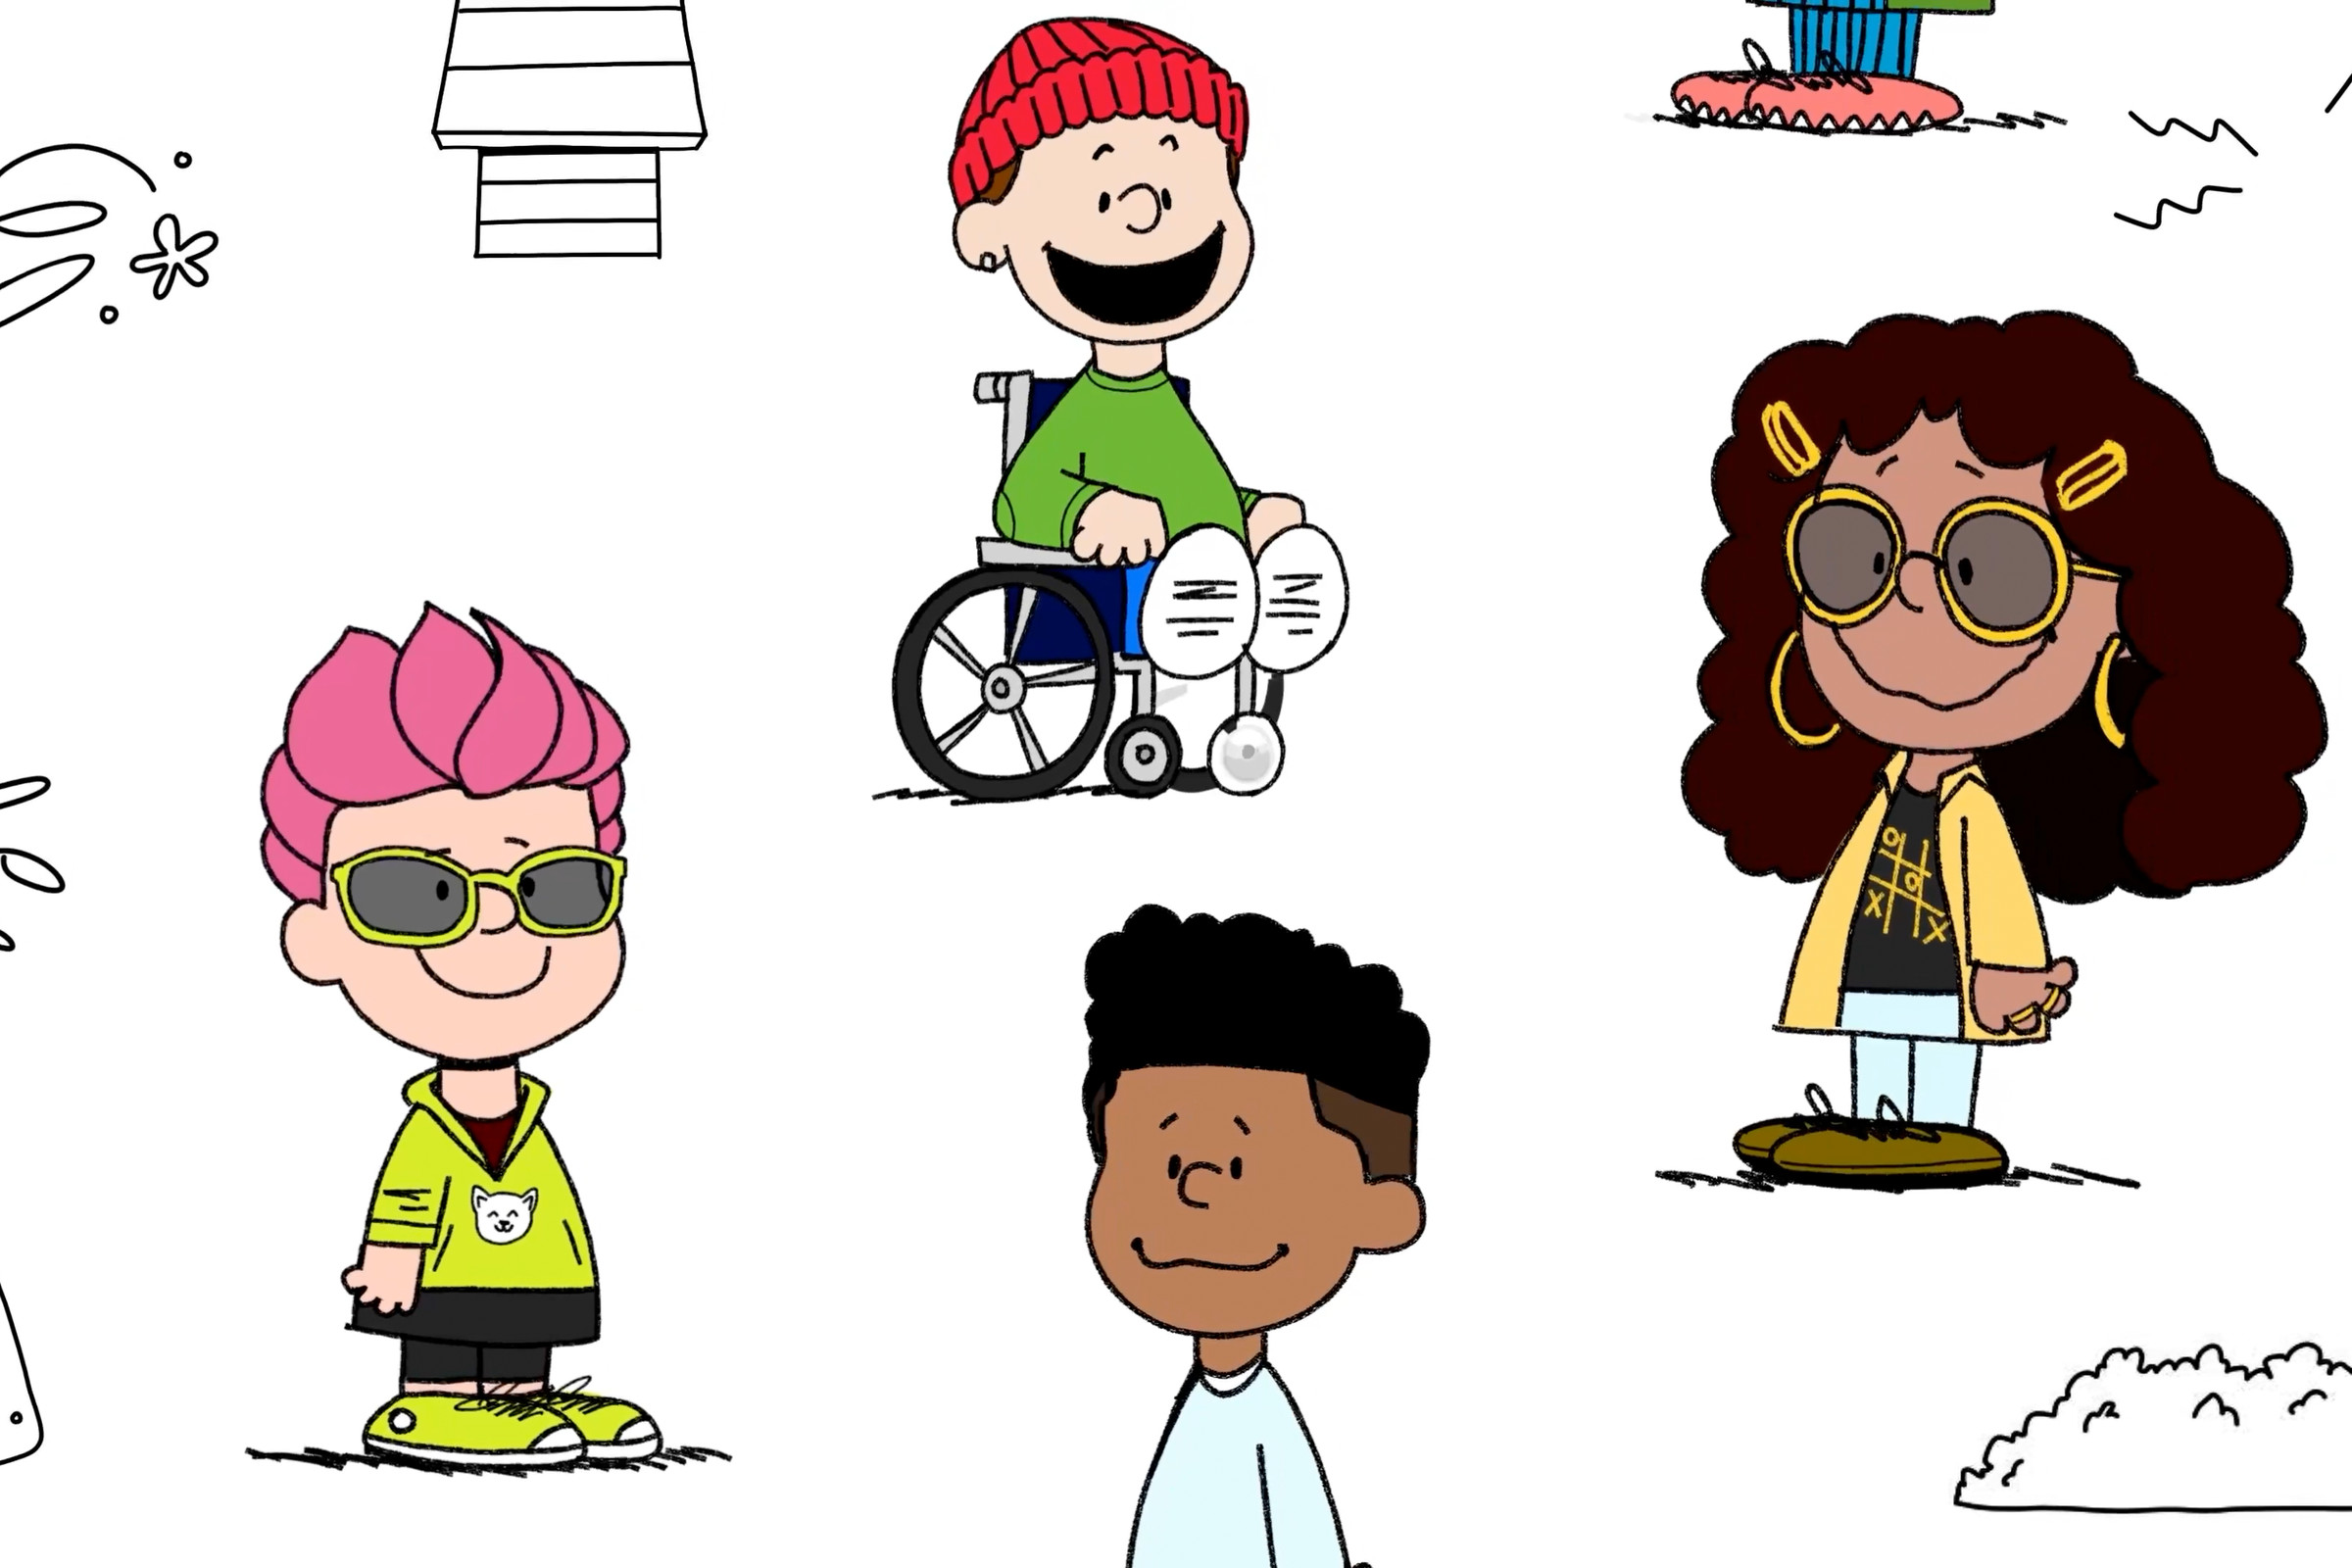 Learn how to draw yourself as a Peanuts character in the first “Today at Apple” YouTube session.